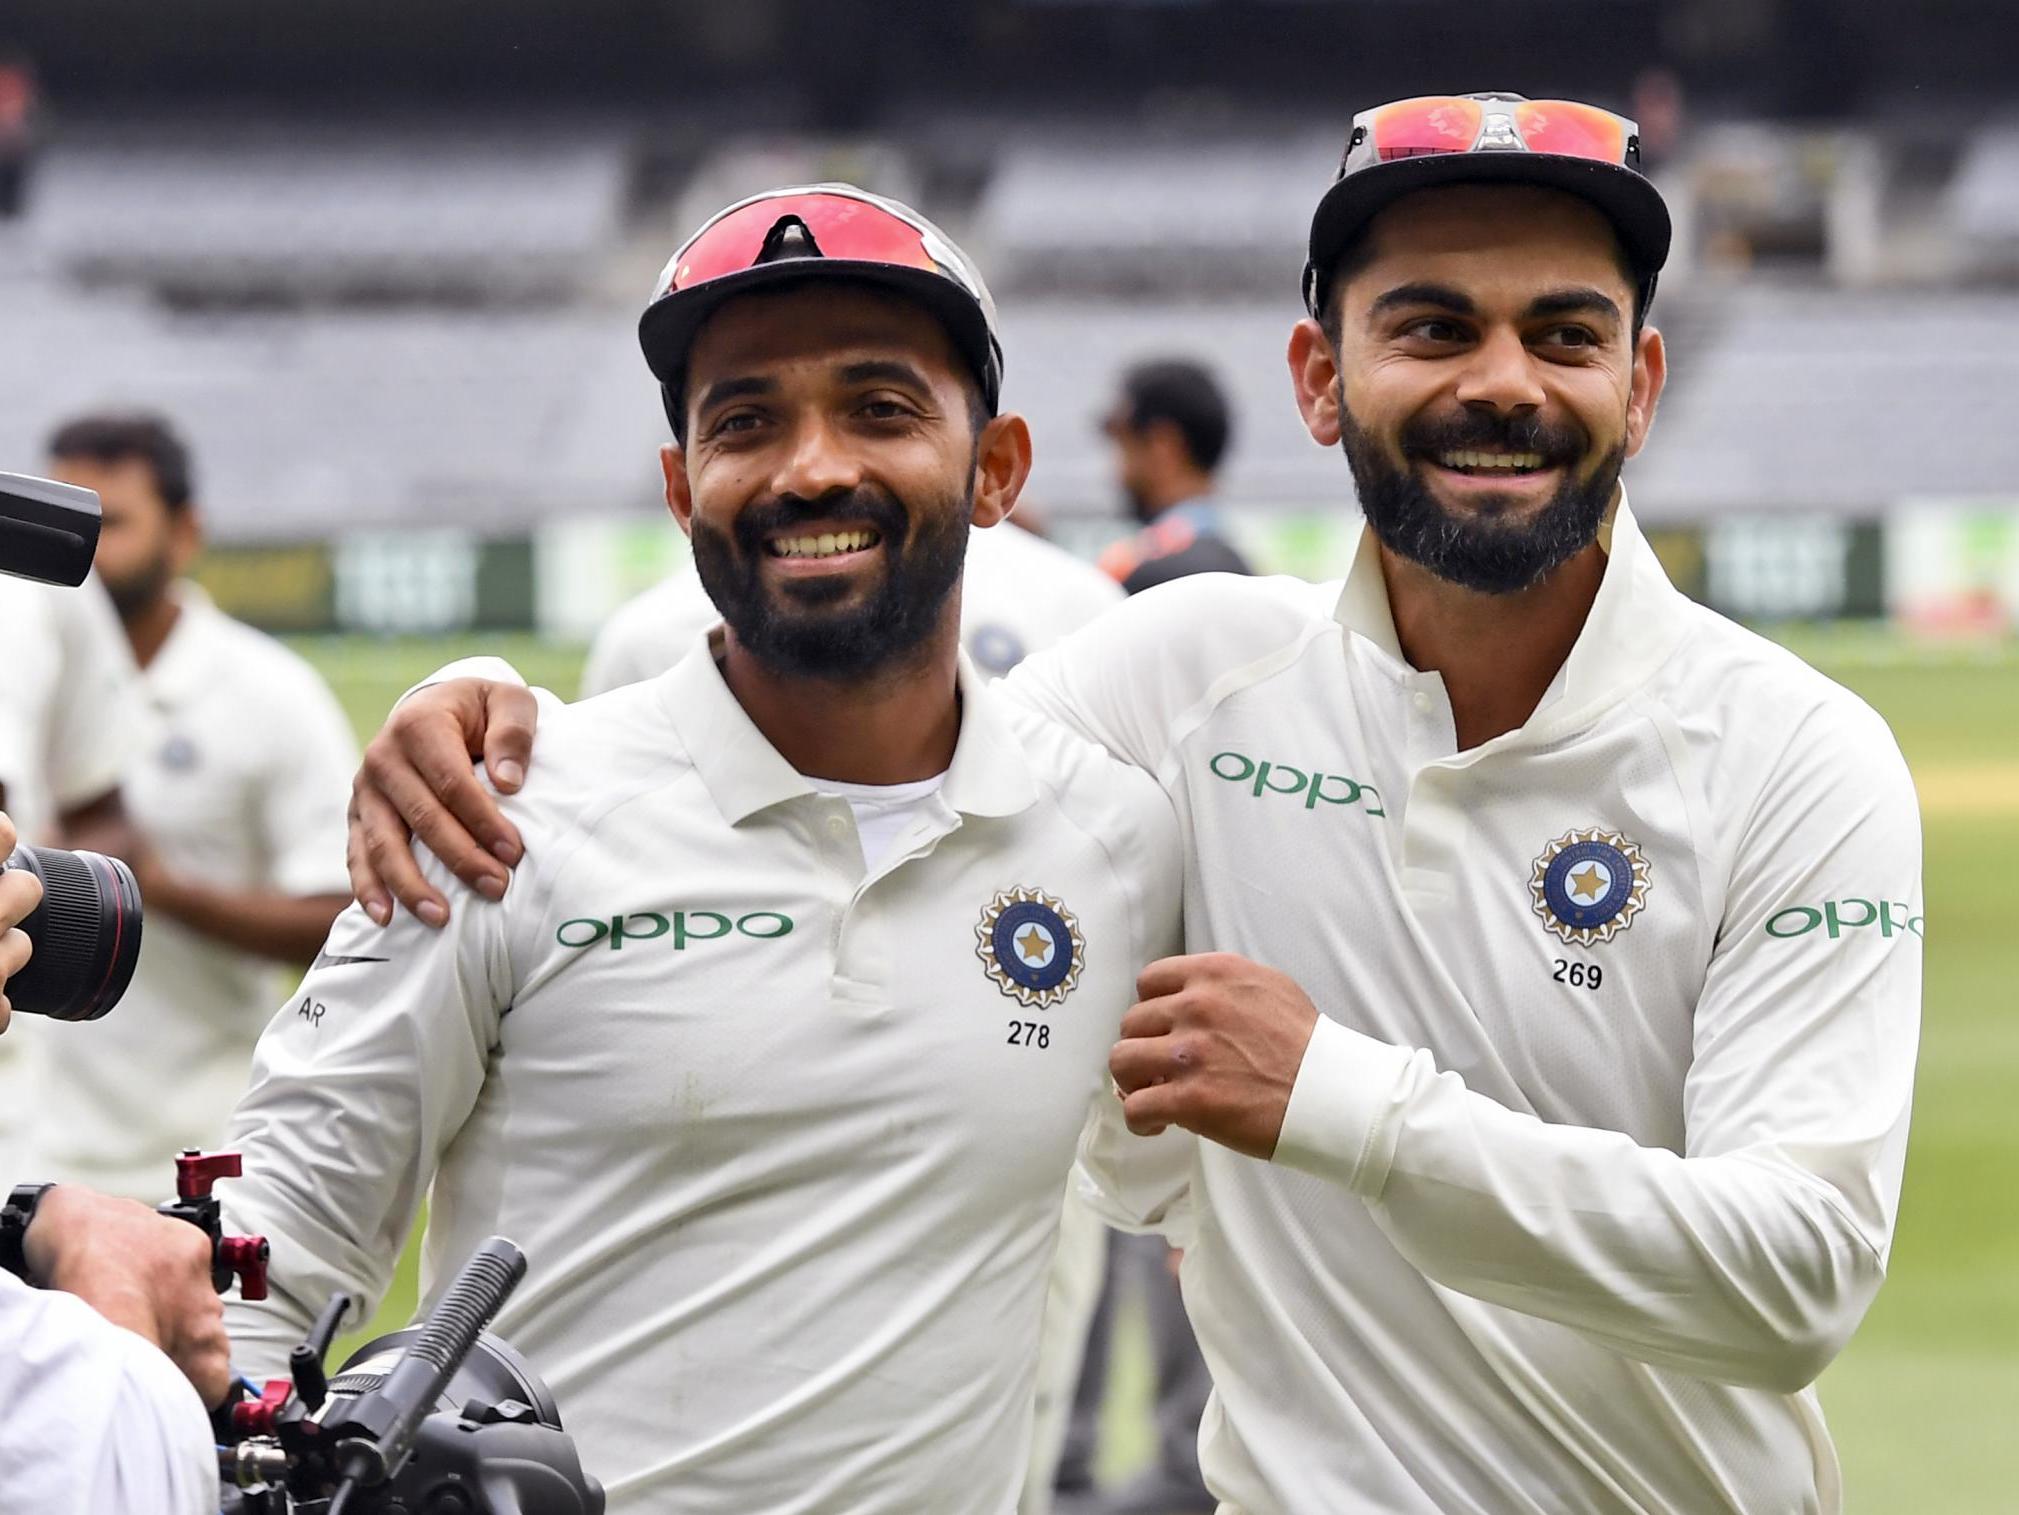 Virat Kohli's team are poised to shrug off the nation's history of underachievement Down Under